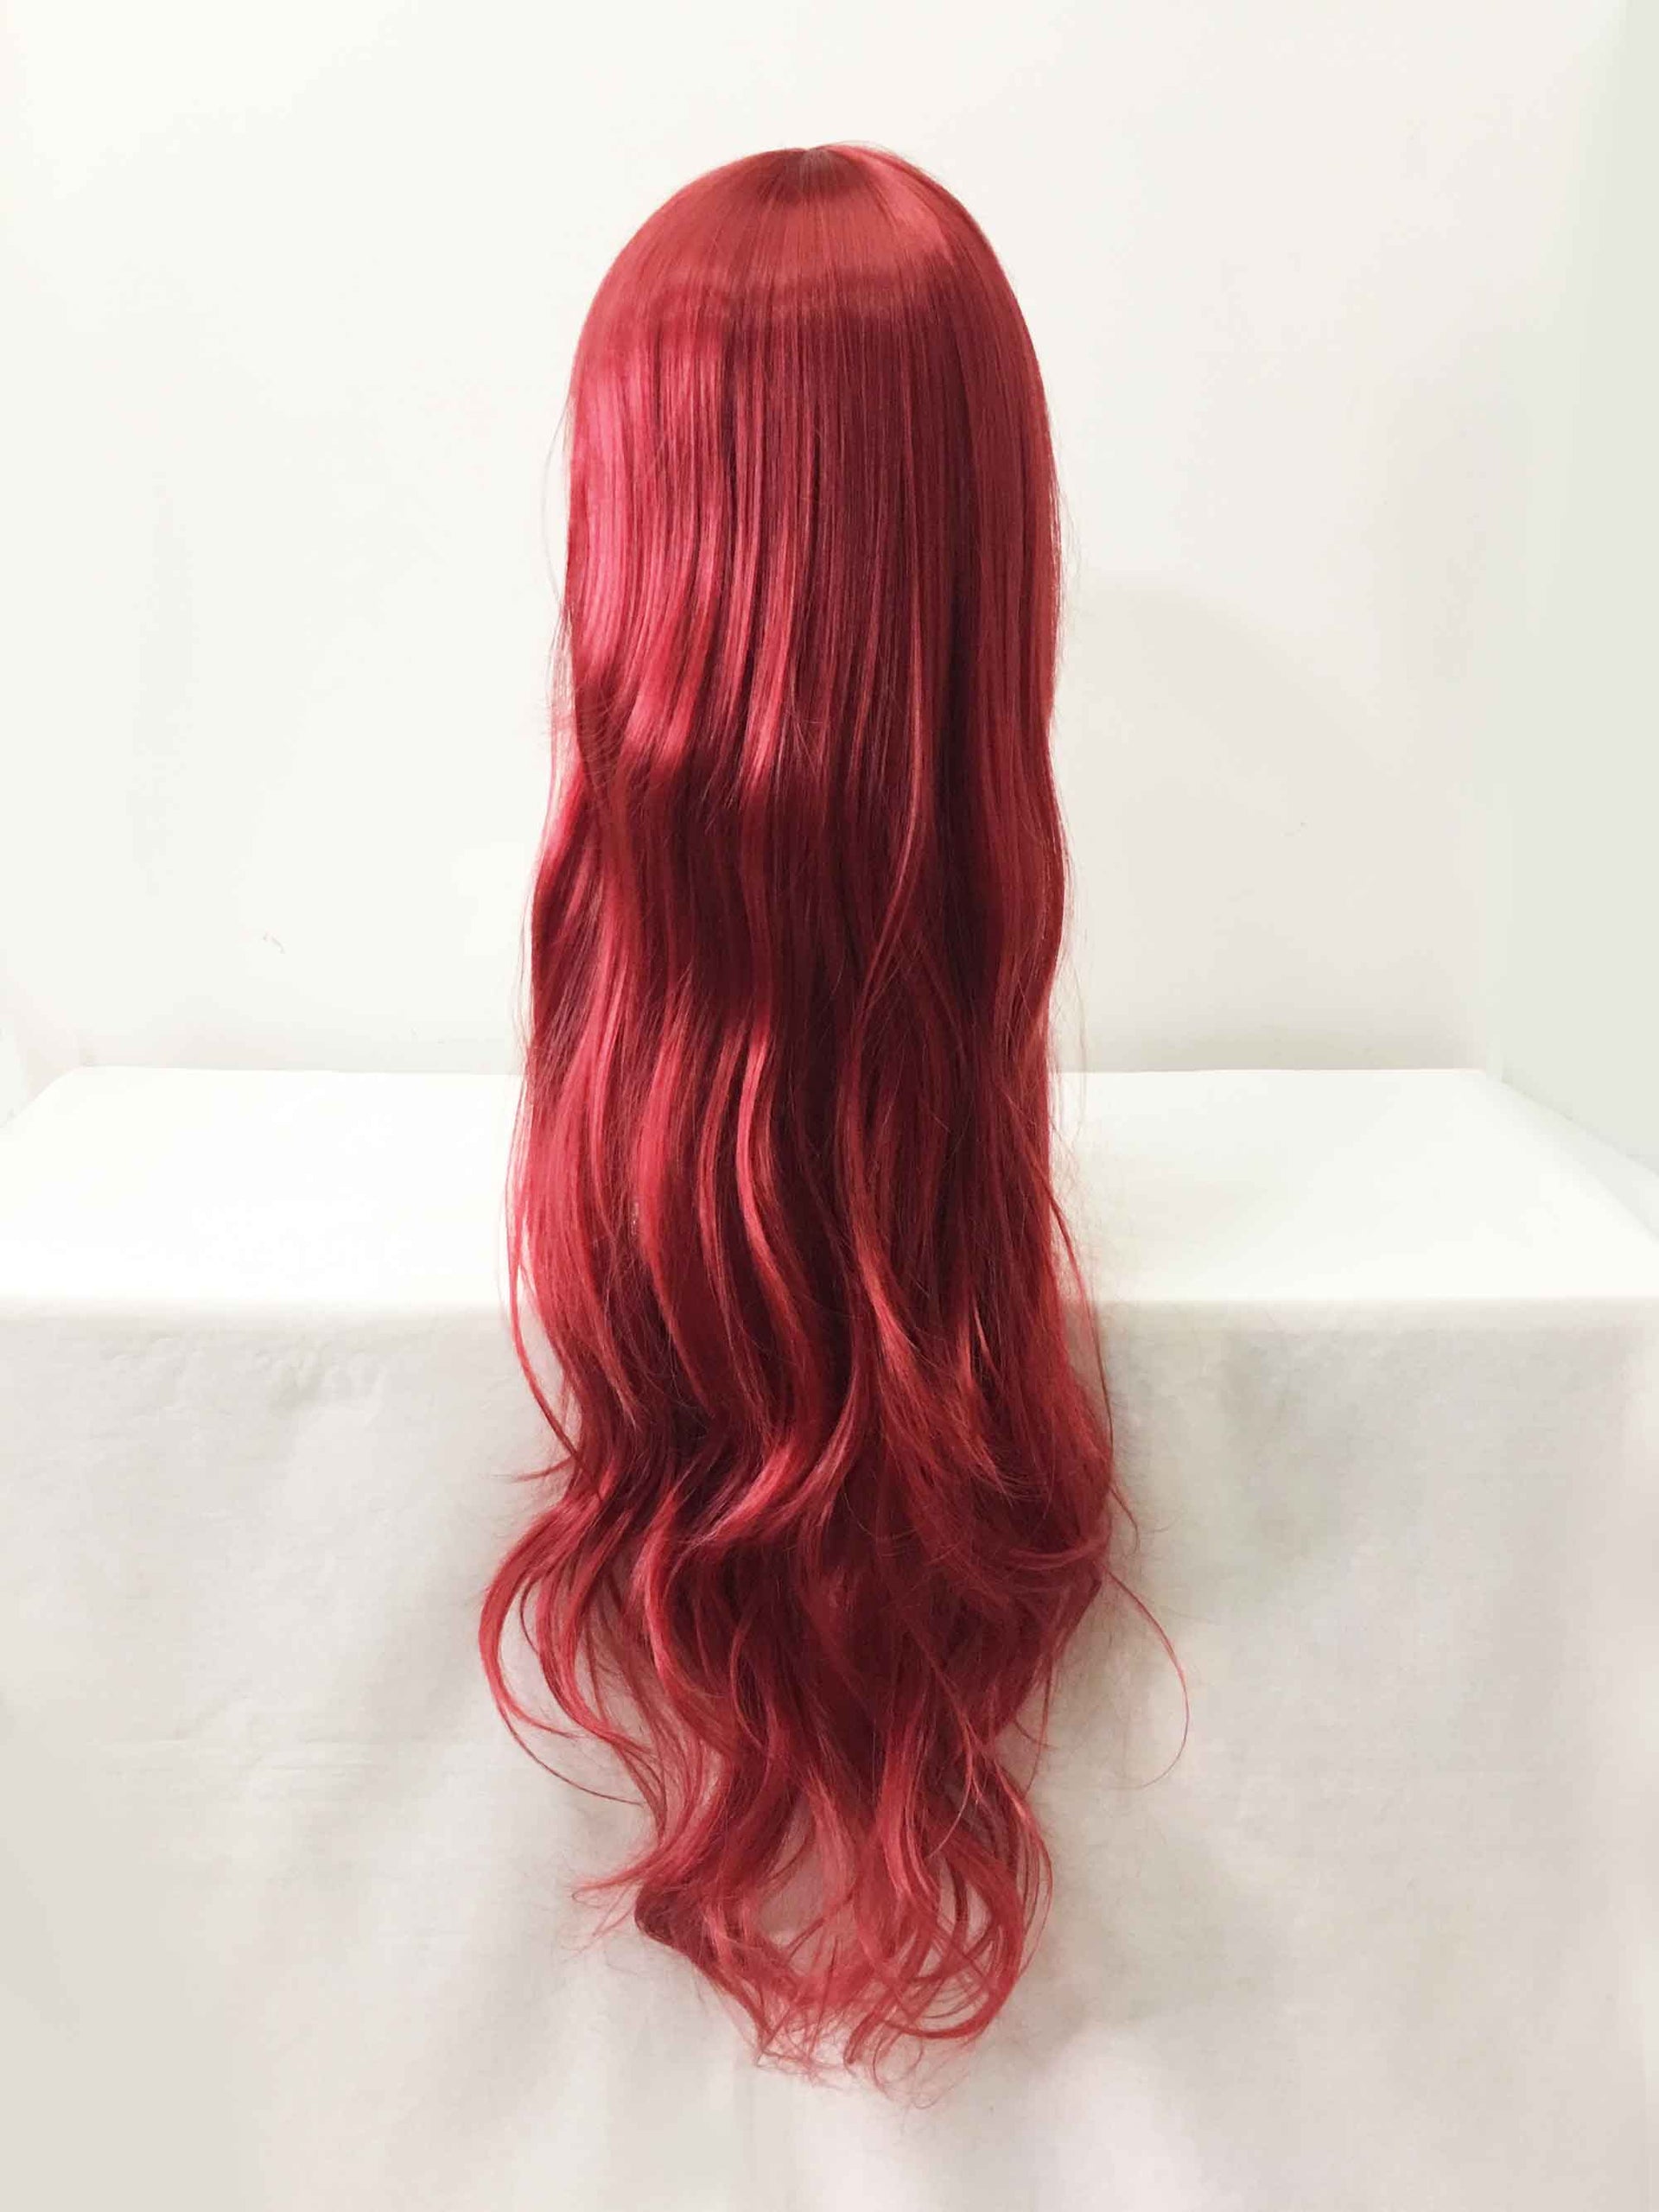 nevermindyrhead Women Red Long Curly Side Swept Bangs Cosplay Wig